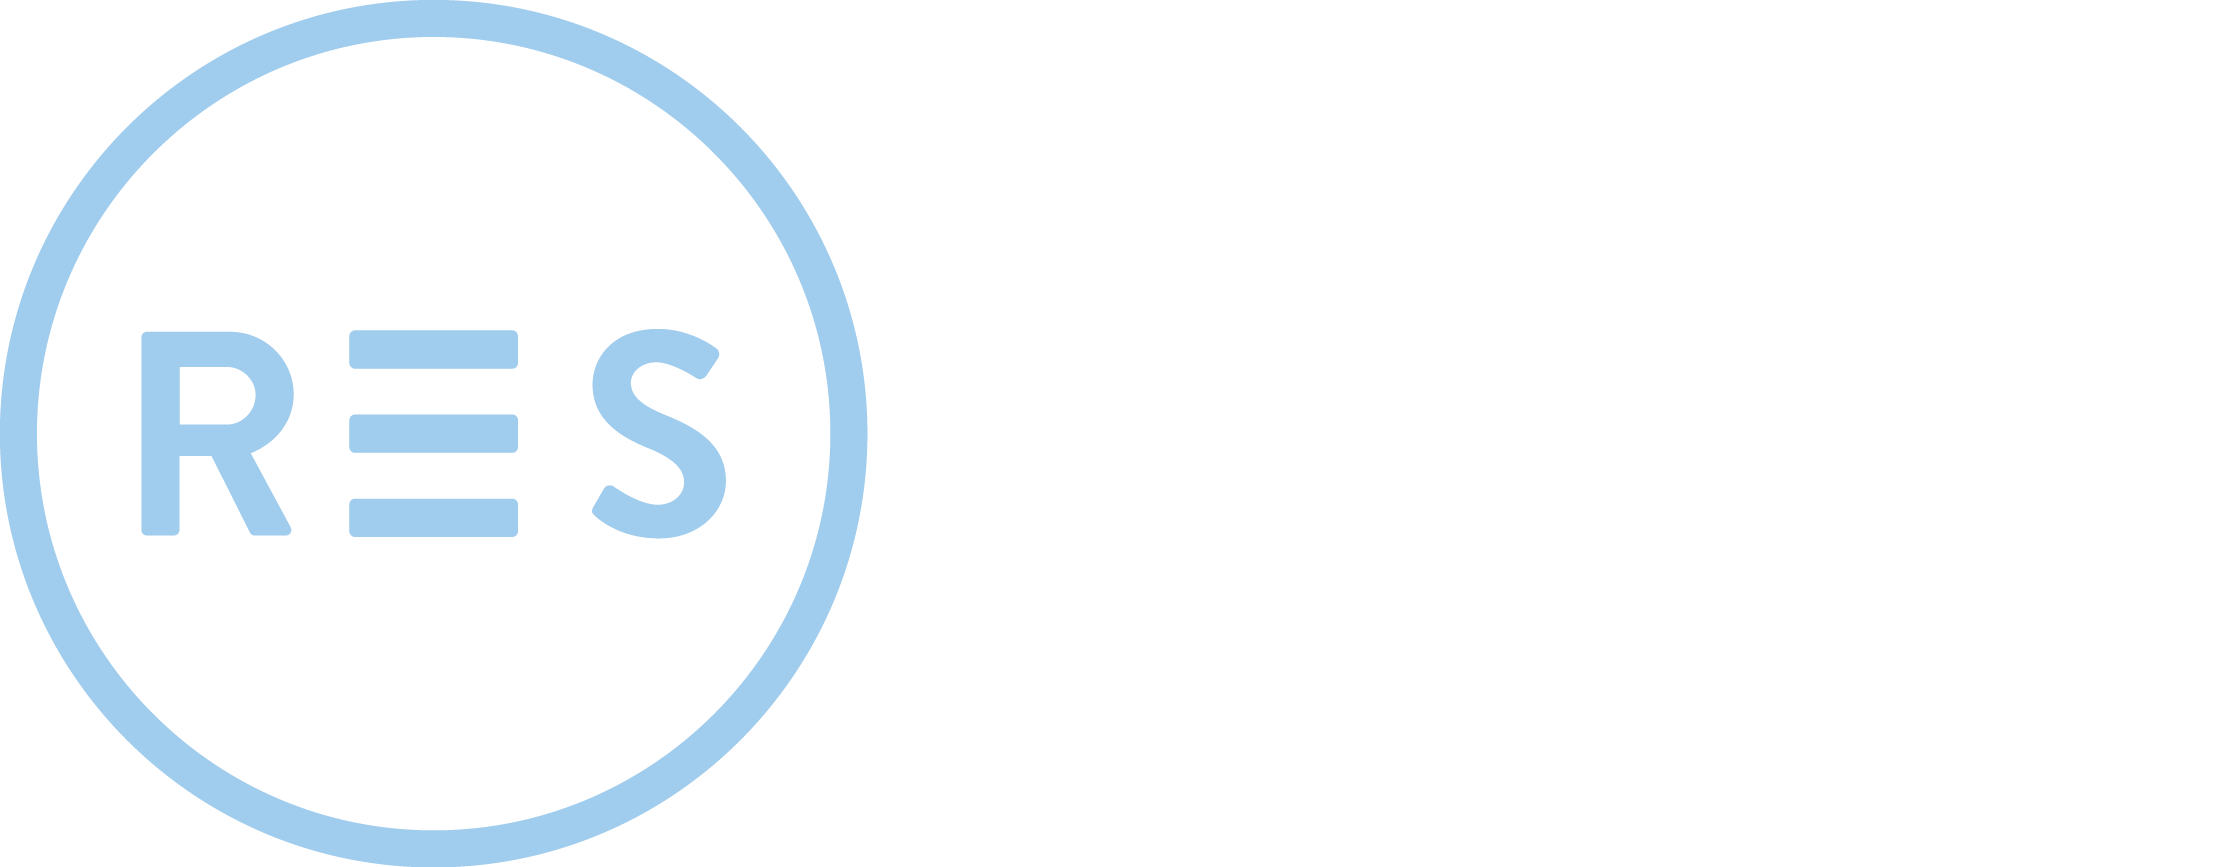 Real Estate Services by Mirvac - 